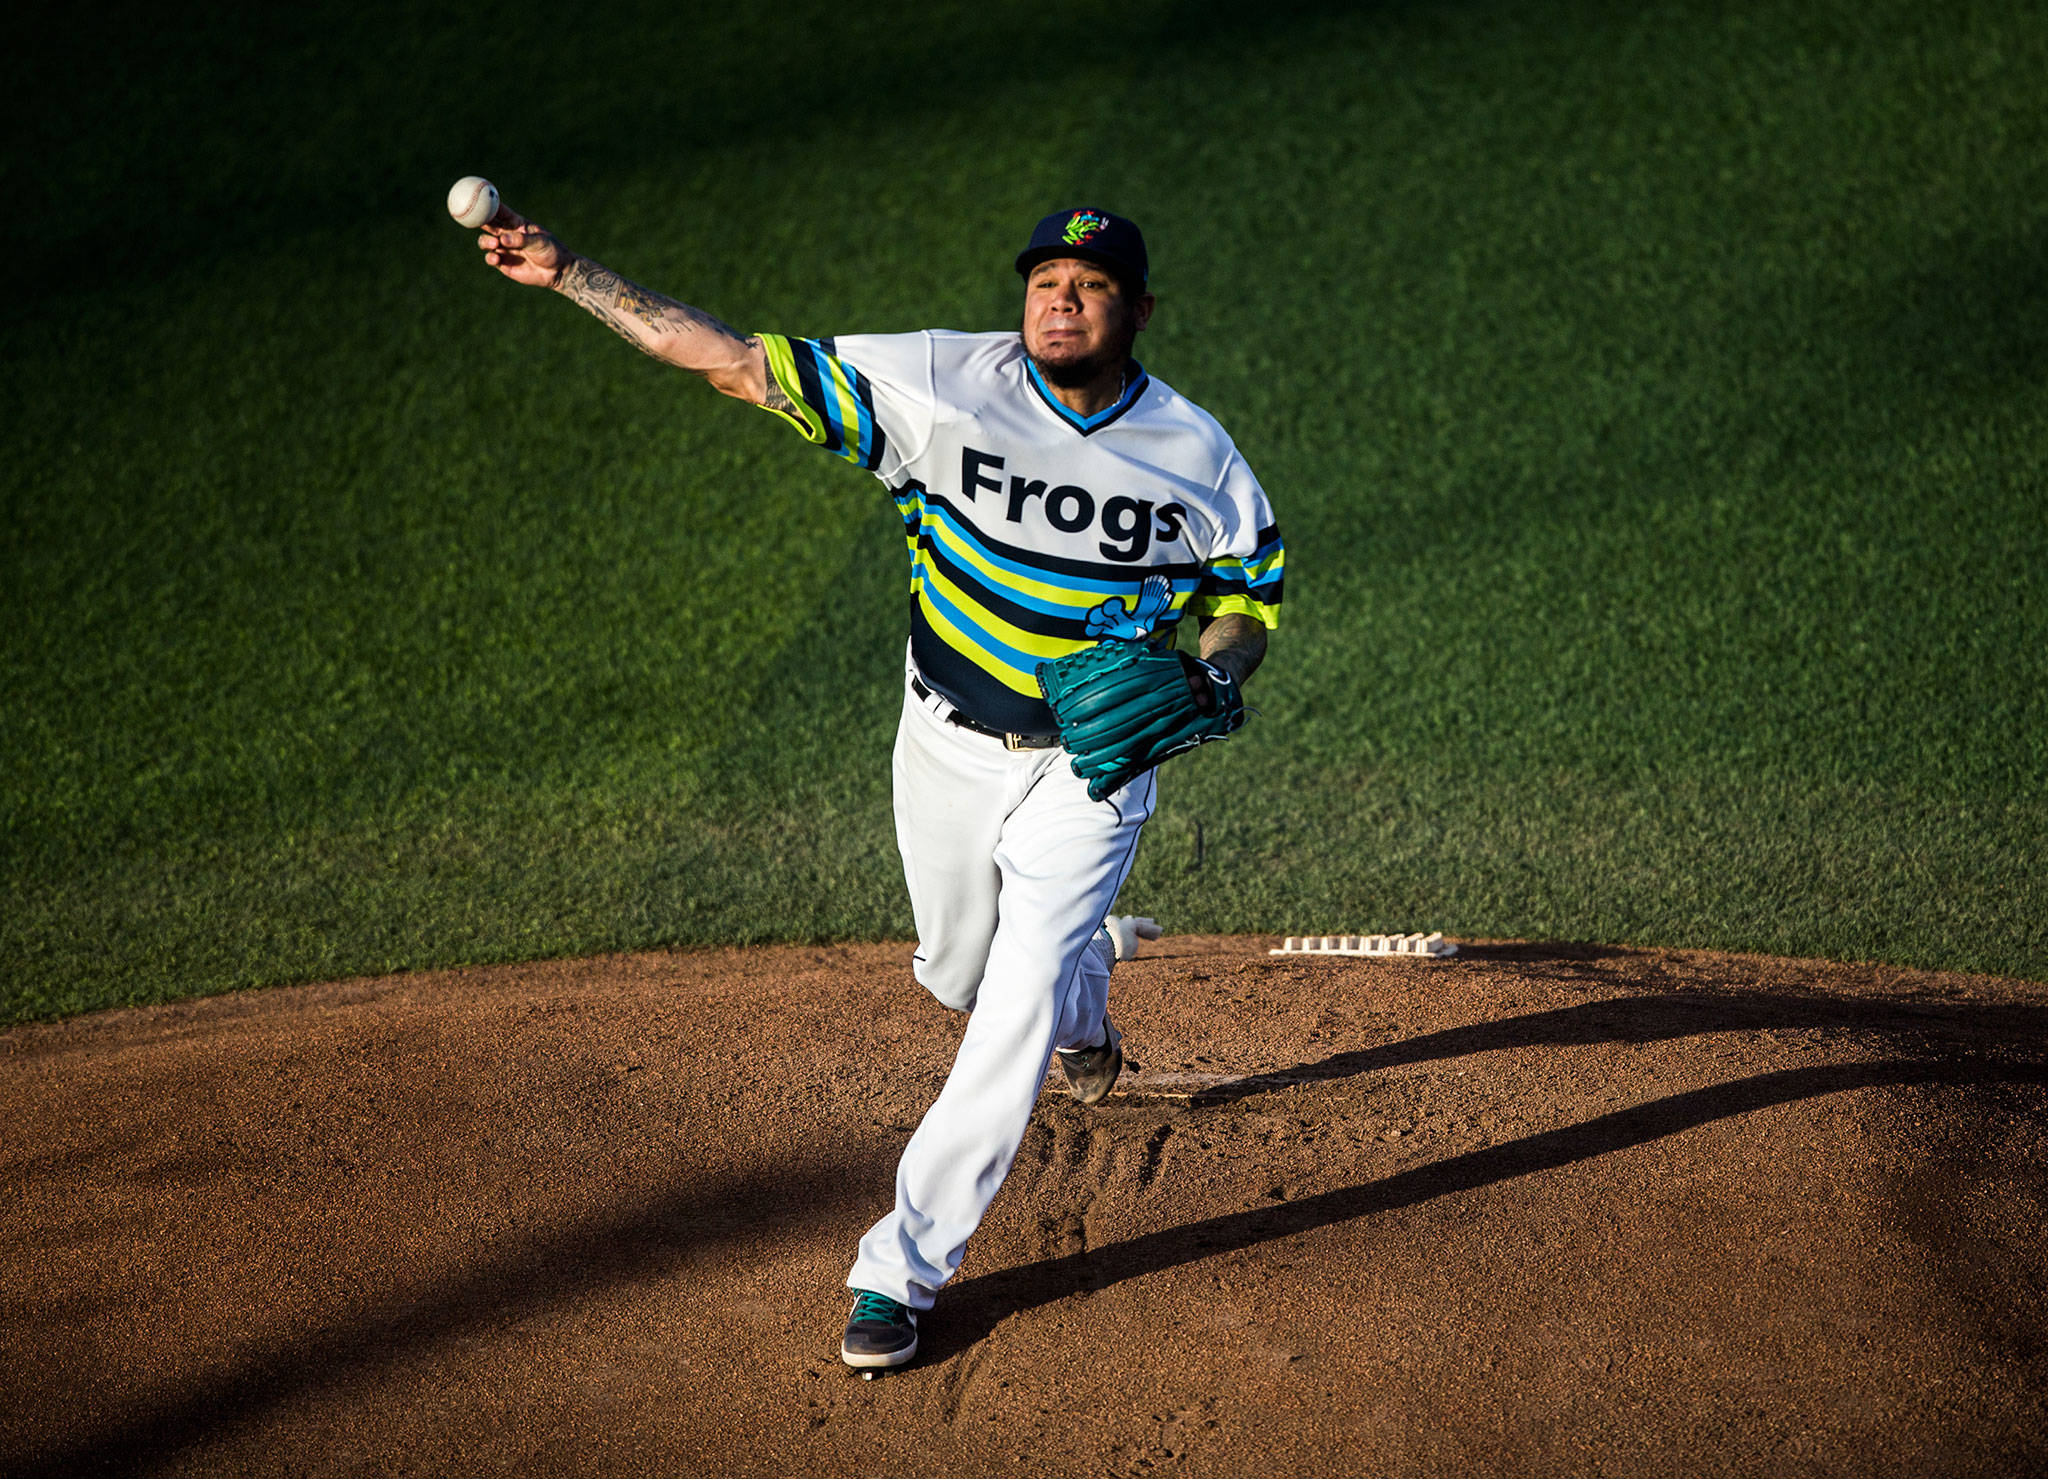 When Felix Hernandez is inducted into Mariners Hall of Fame, his Everett  host family will be watching